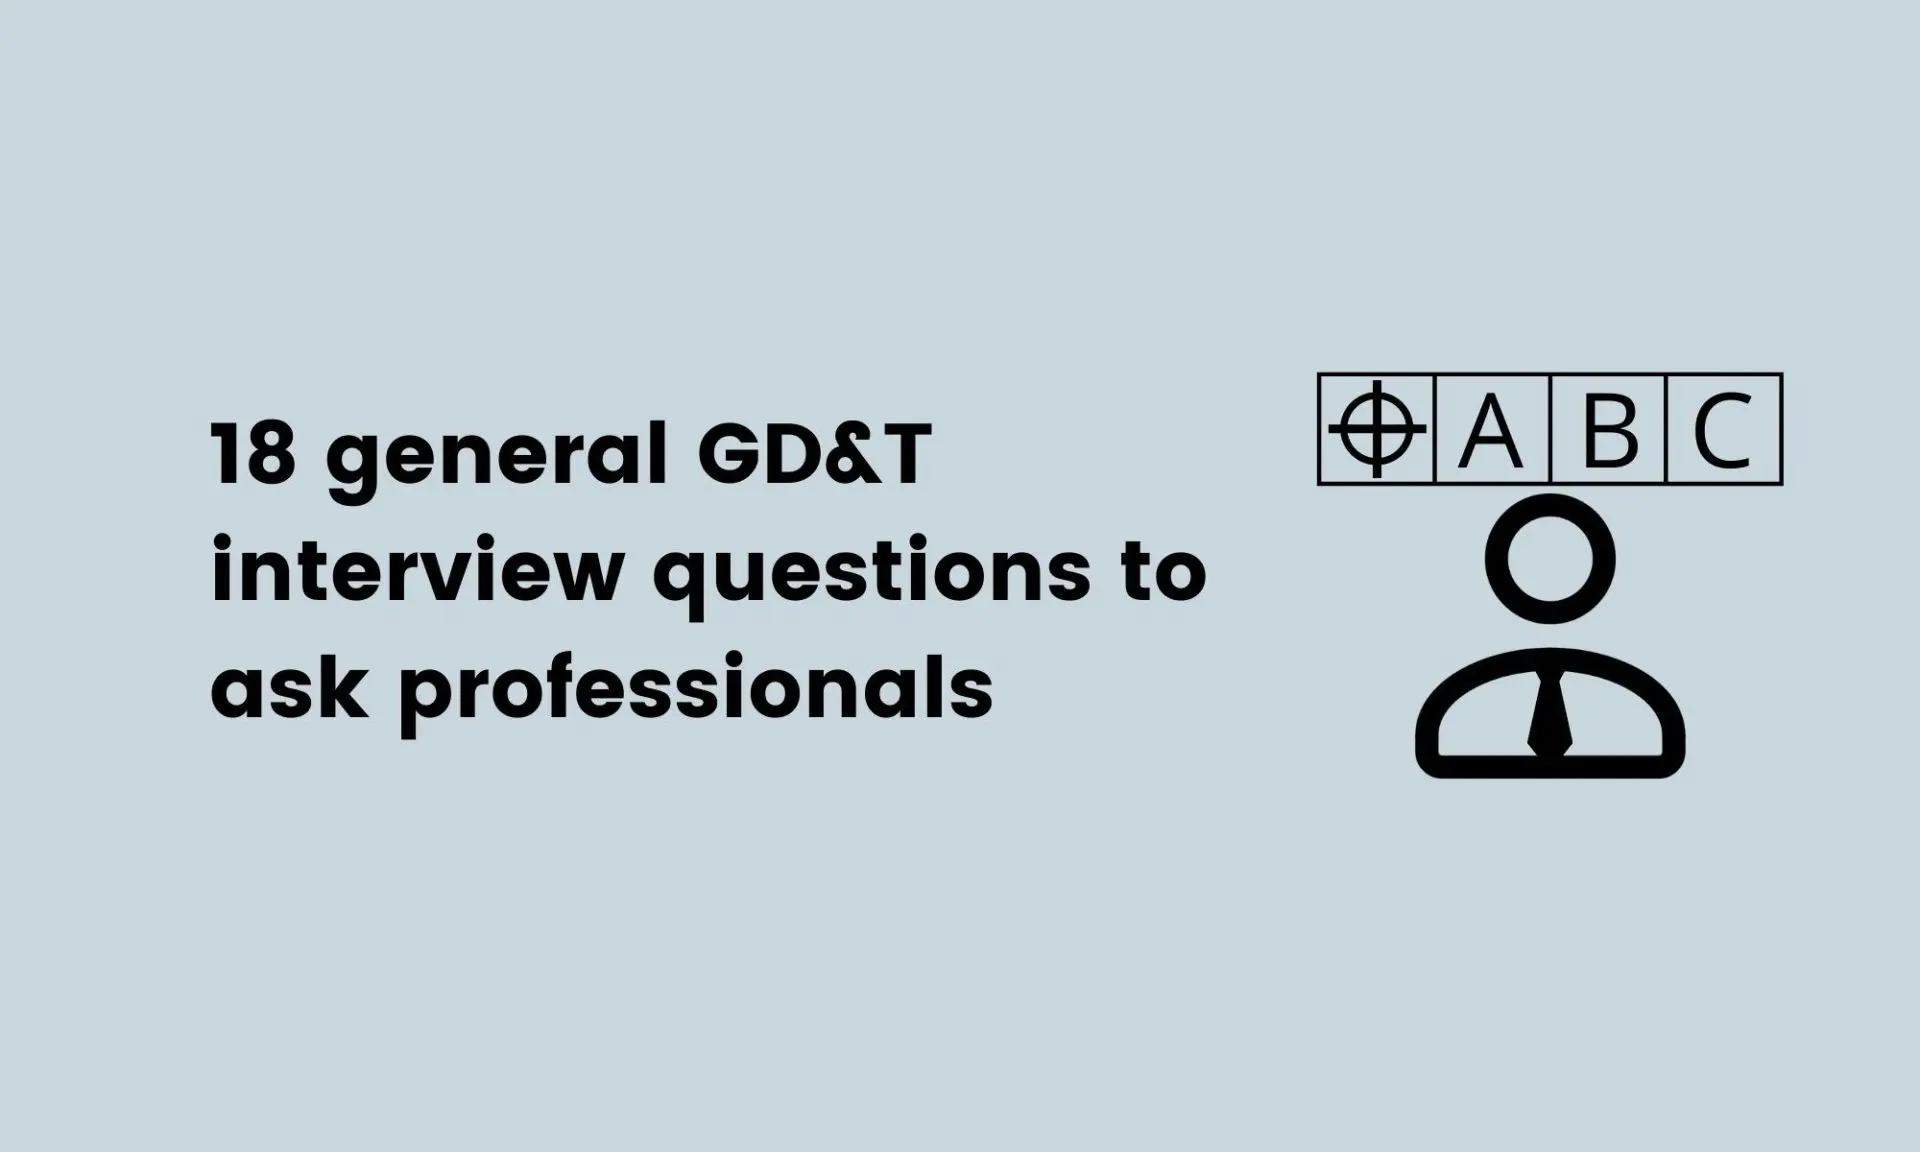 18 general GD&T interview questions to ask professionals